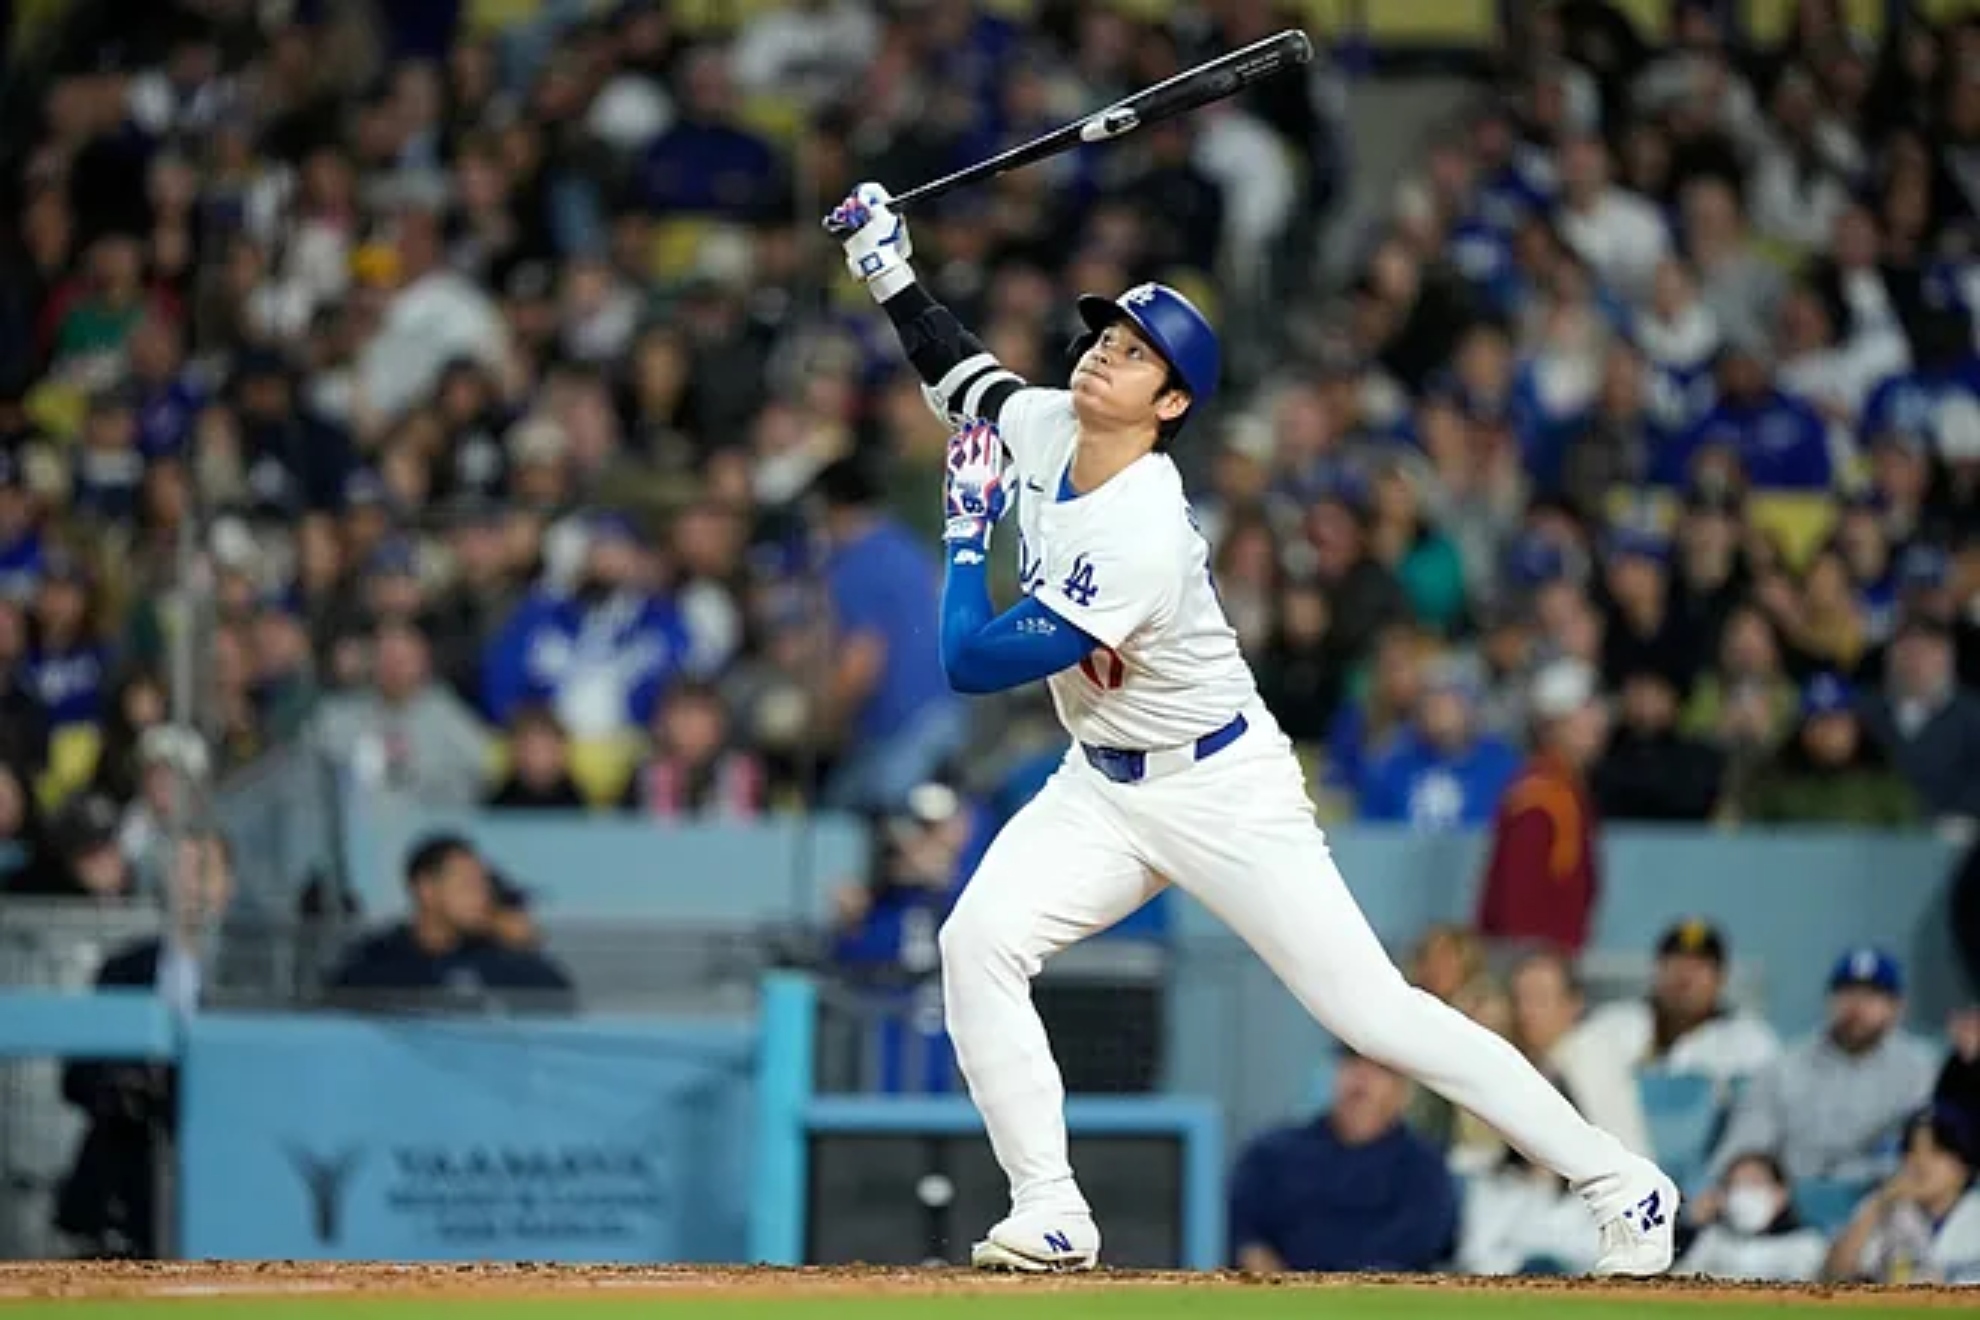 Shohei Ohtani makes history by tying Hideki Matsui as the Japanese with most HR in the MLB